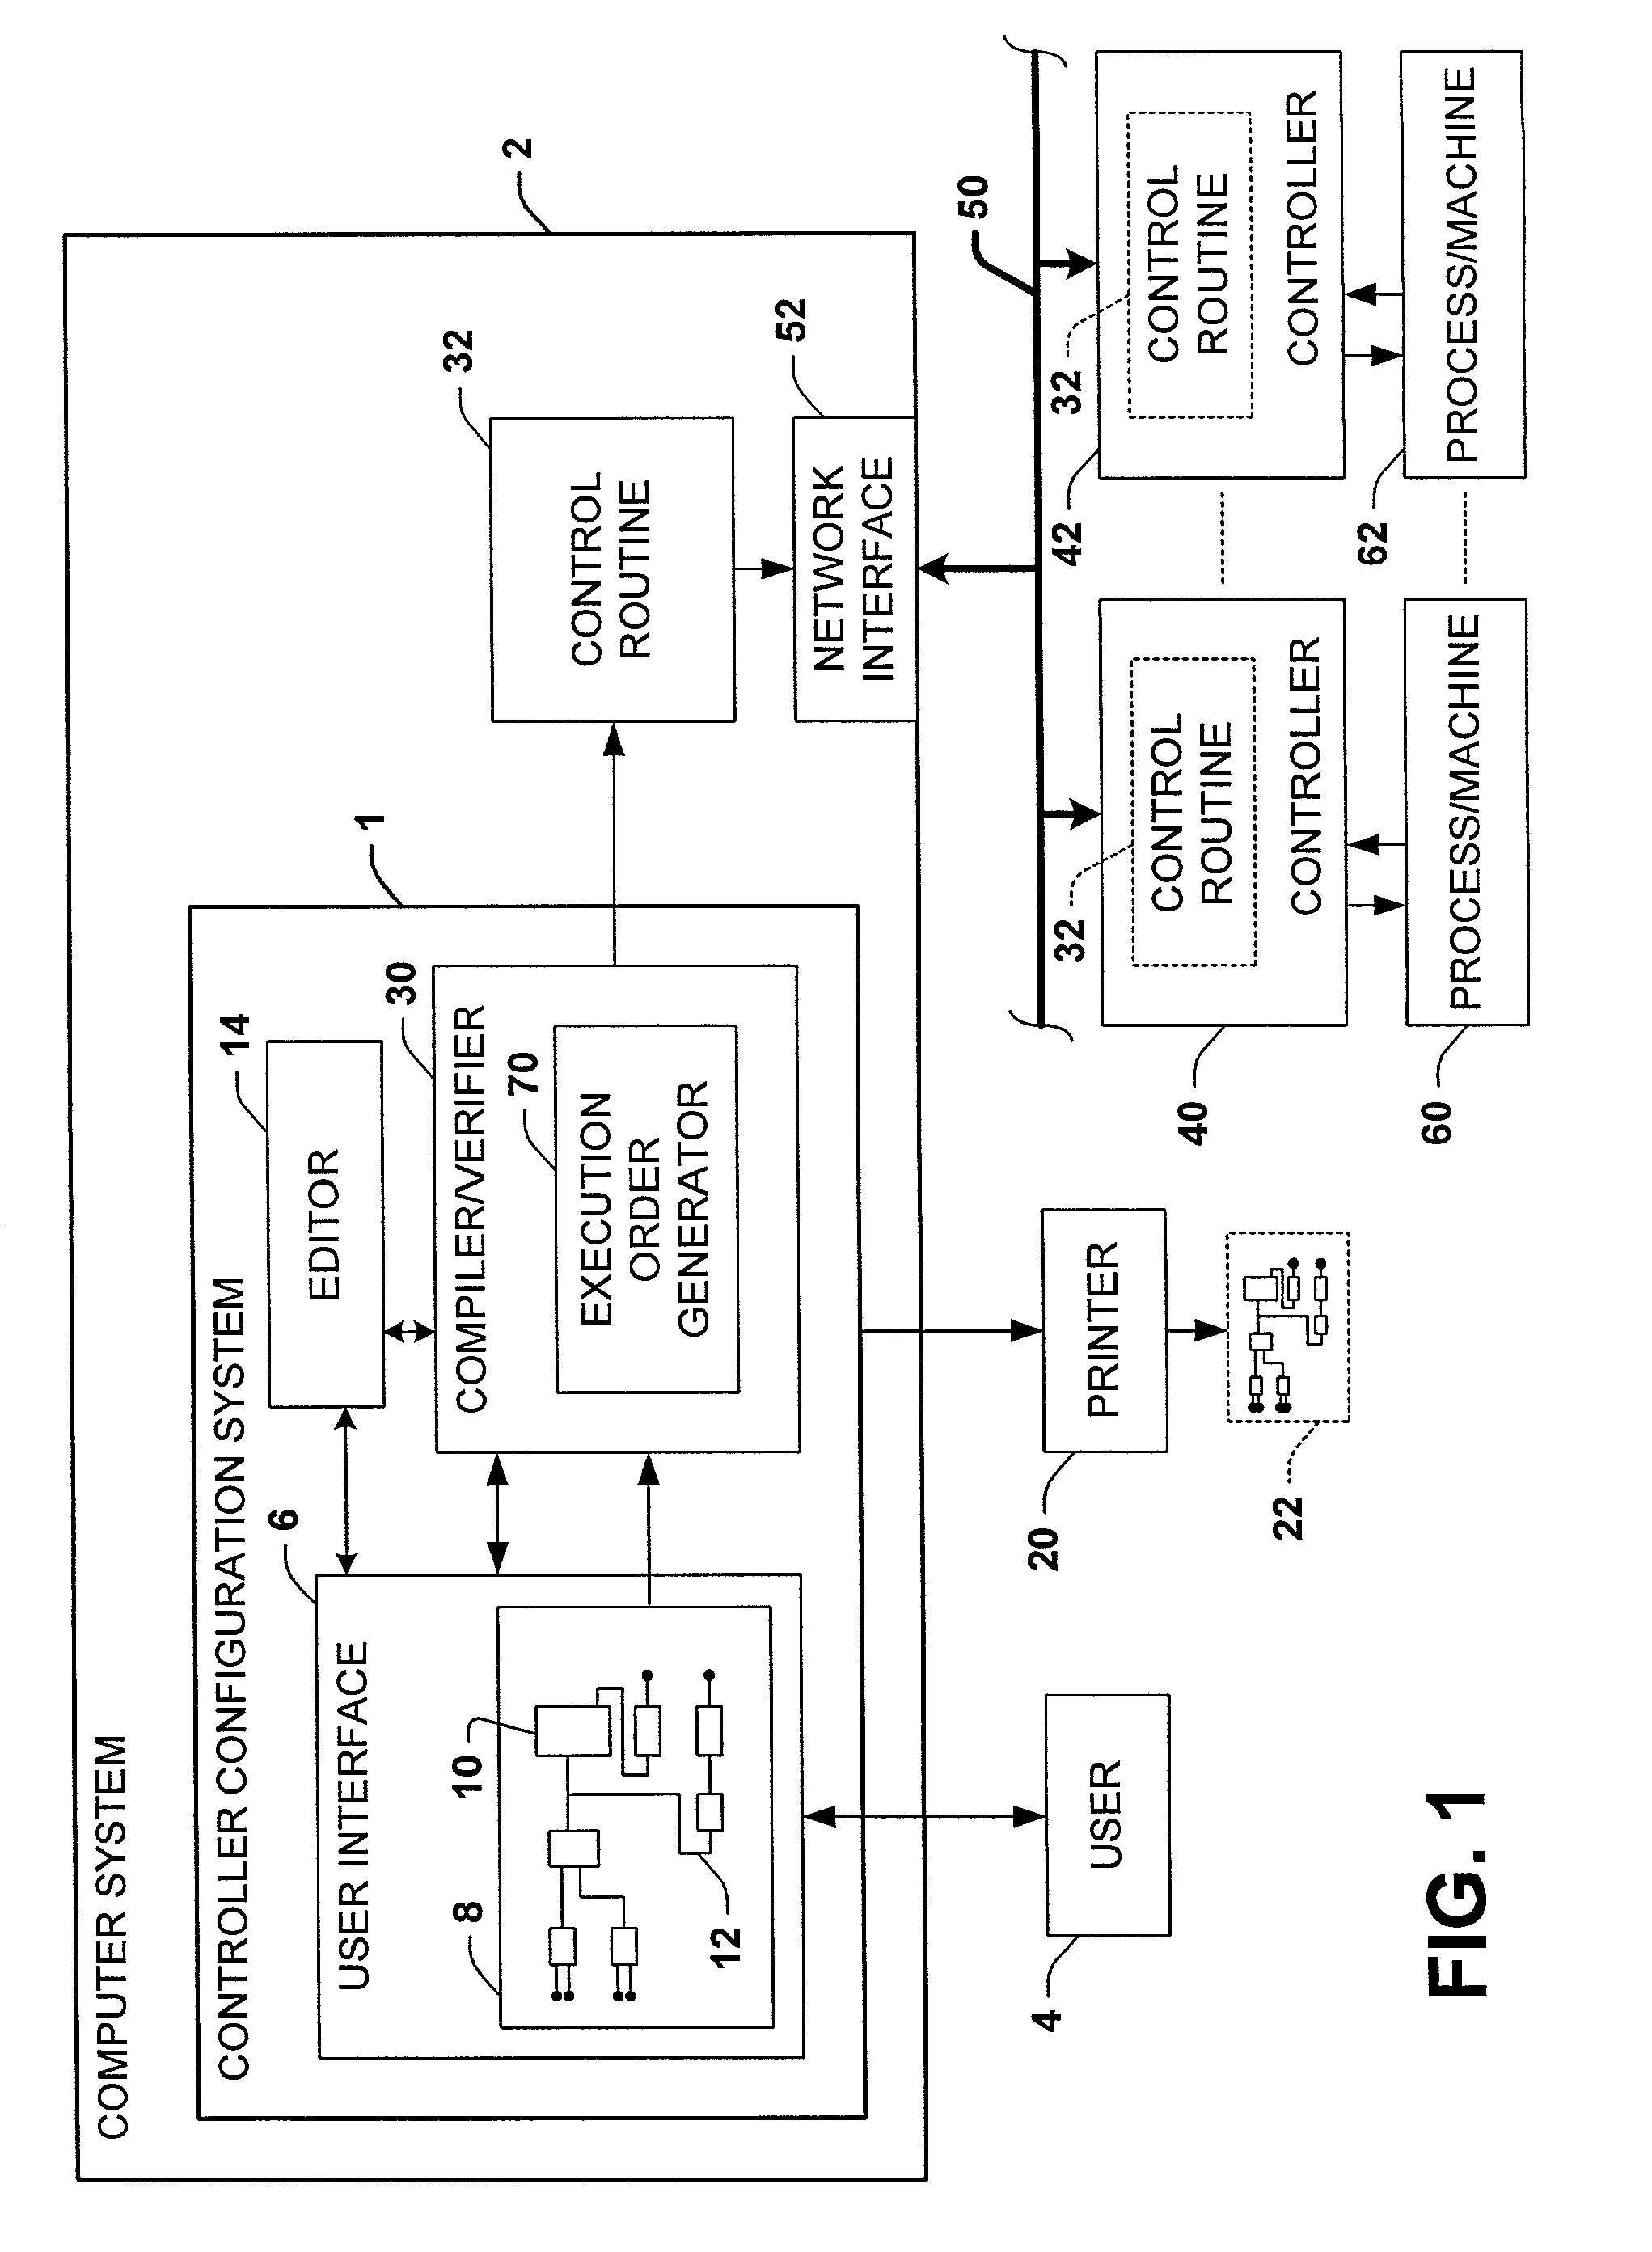 User interface and system for creating function block diagrams